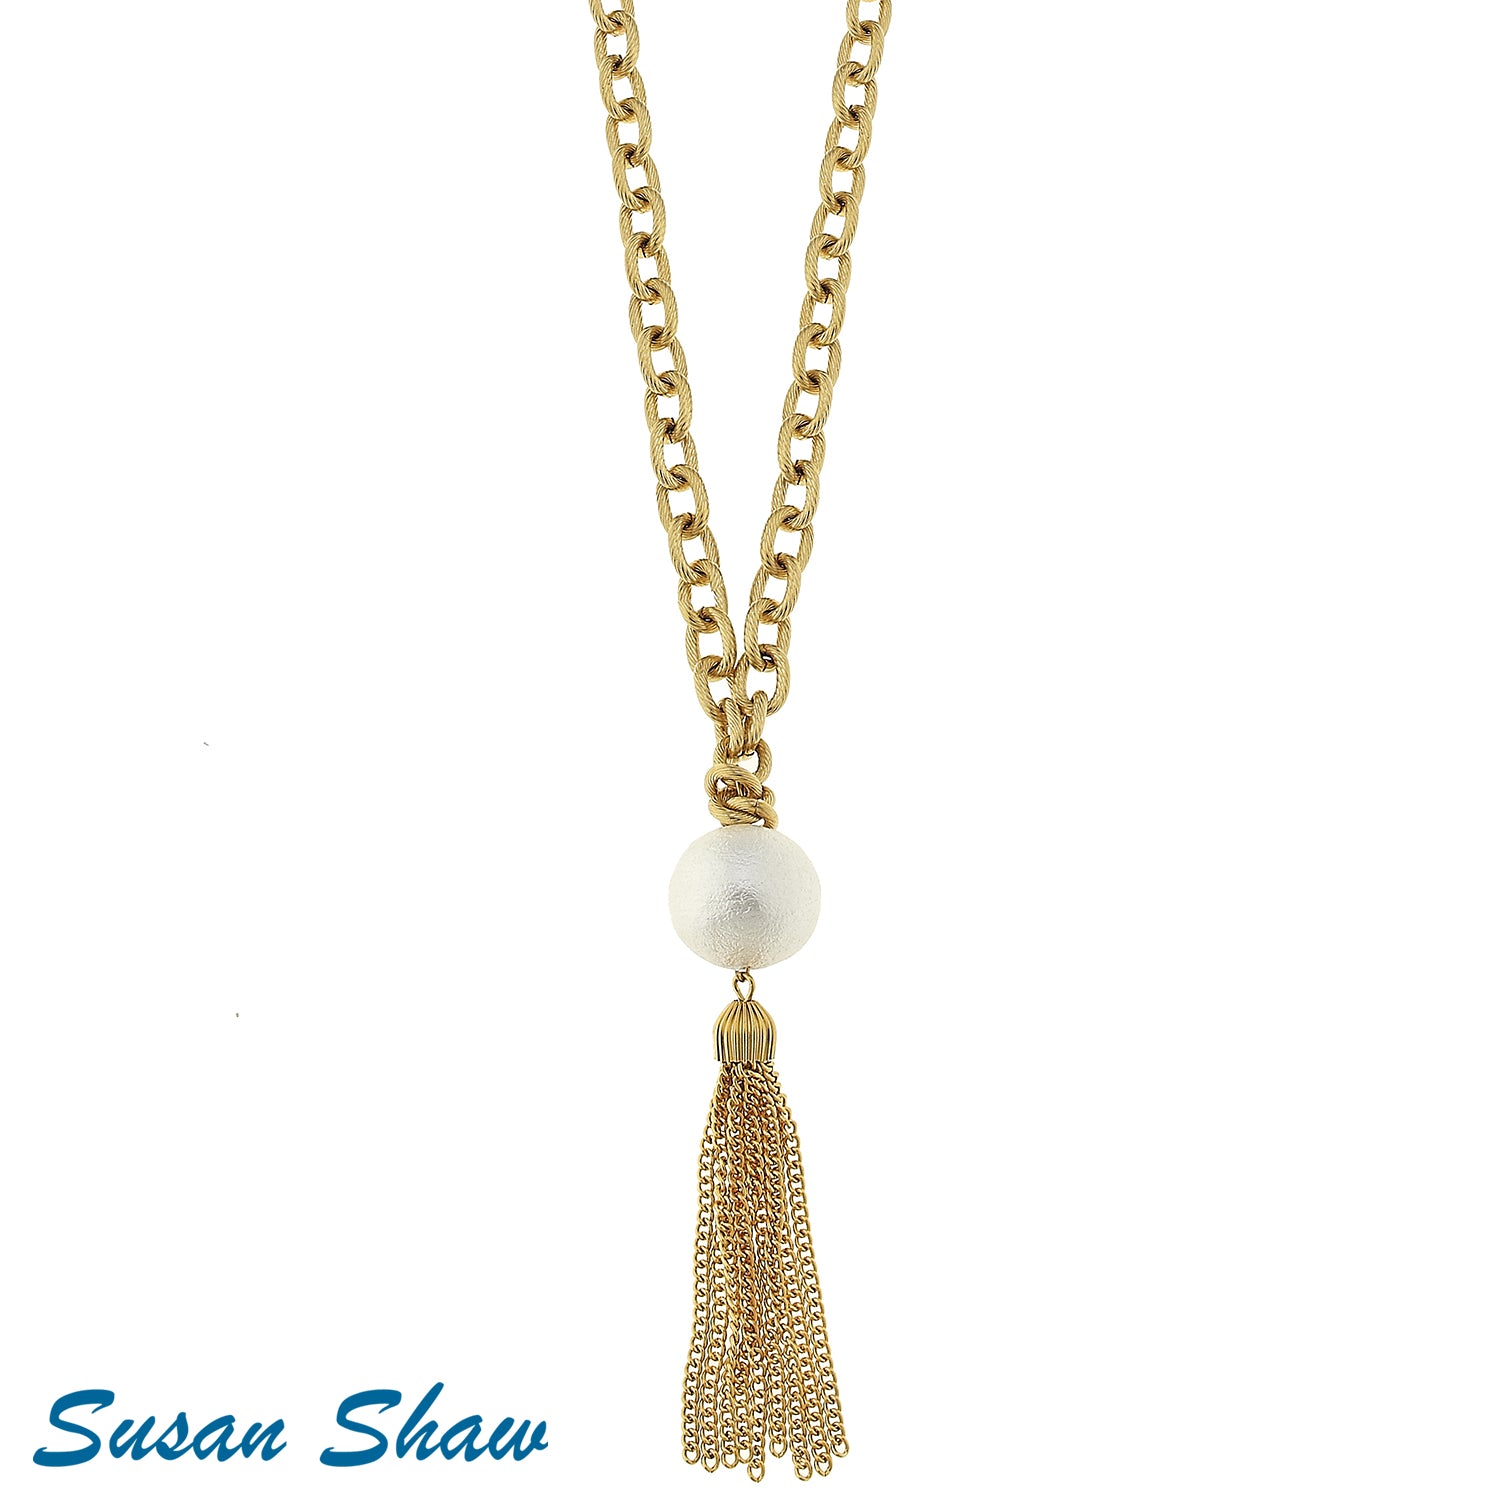 Susan Shaw 32" of Gold Chain with White Cotton Pearl and Tassel